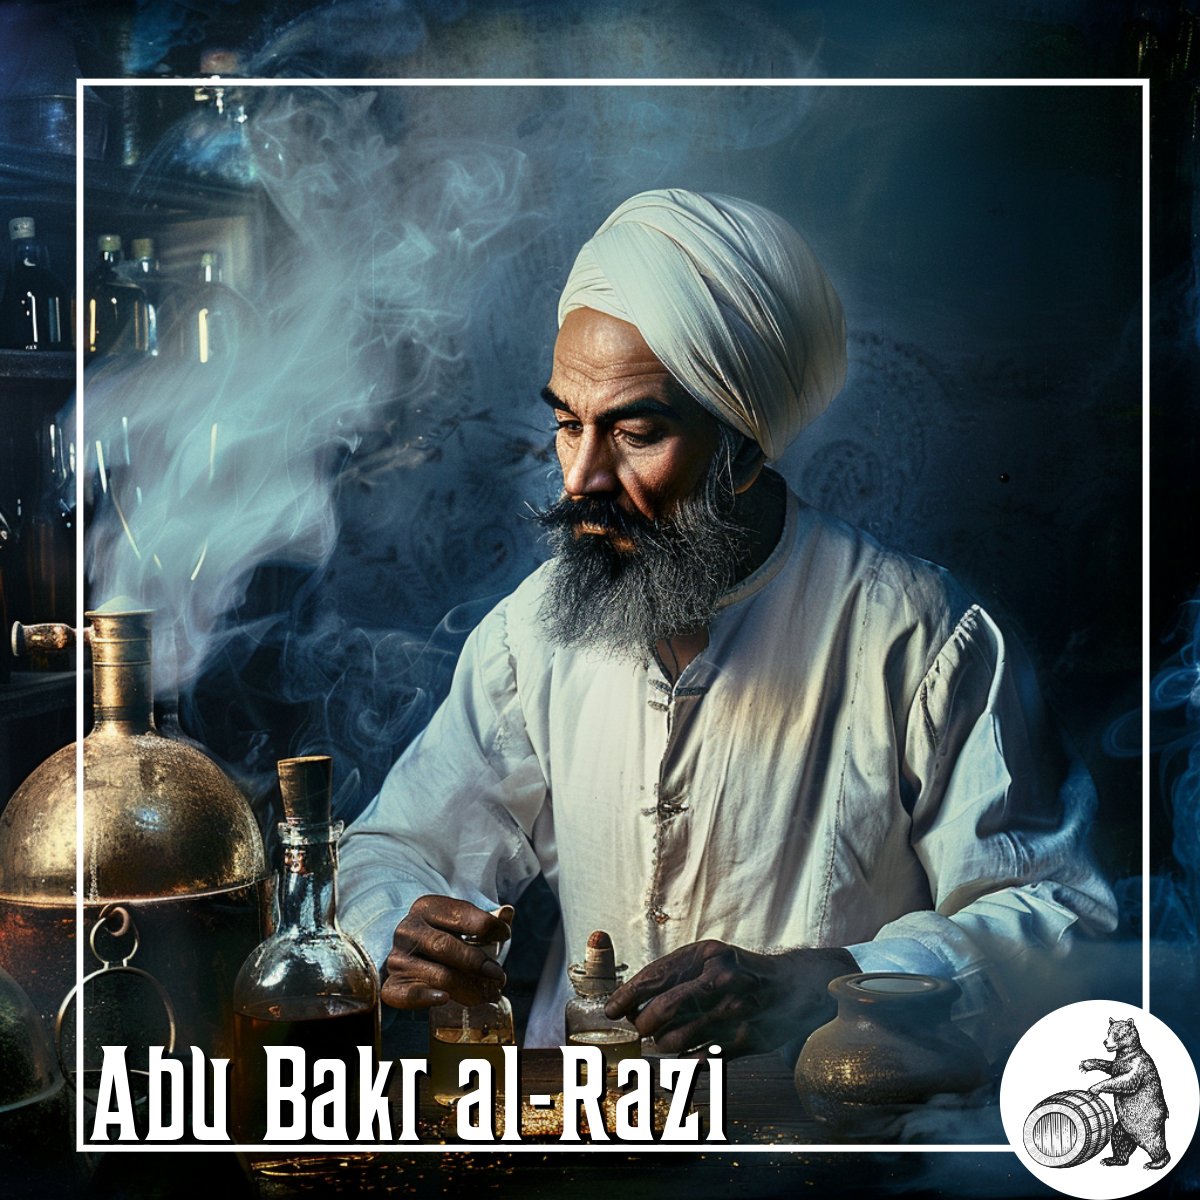 Discover the legacy of 'Abū Bakr Muḥammad ibn Zakaryā ar-Rāzī', a pioneer in medicine and distillation. #AbuBakrAlRazi Join us at our Tasting Room: Thu-Sat 12-6pm, Sun 12-5pm. For Mon-Wed, please call ahead for appointments.#LocalFlavor #CraftDistillery #TastingRoom